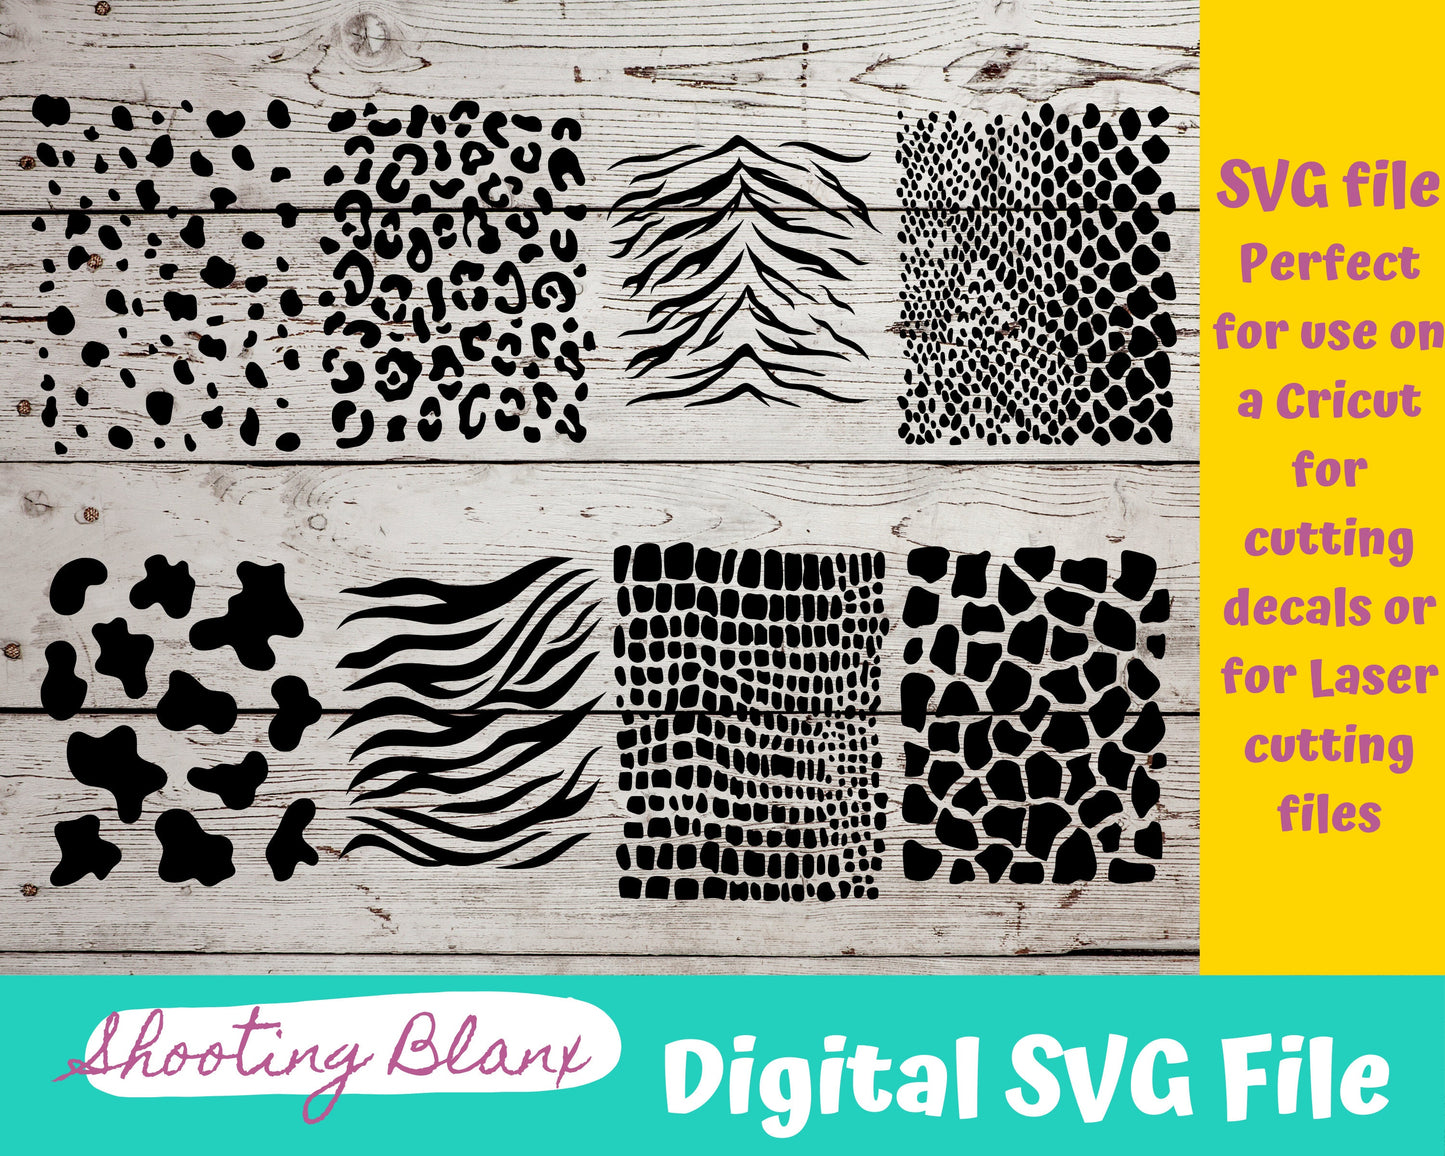 Animal Print Pattern bundle SVG files perfect for Cricut, Cameo, or Silhouette also for laser engraving Glowforge, Giraffe, Snake, Tiger